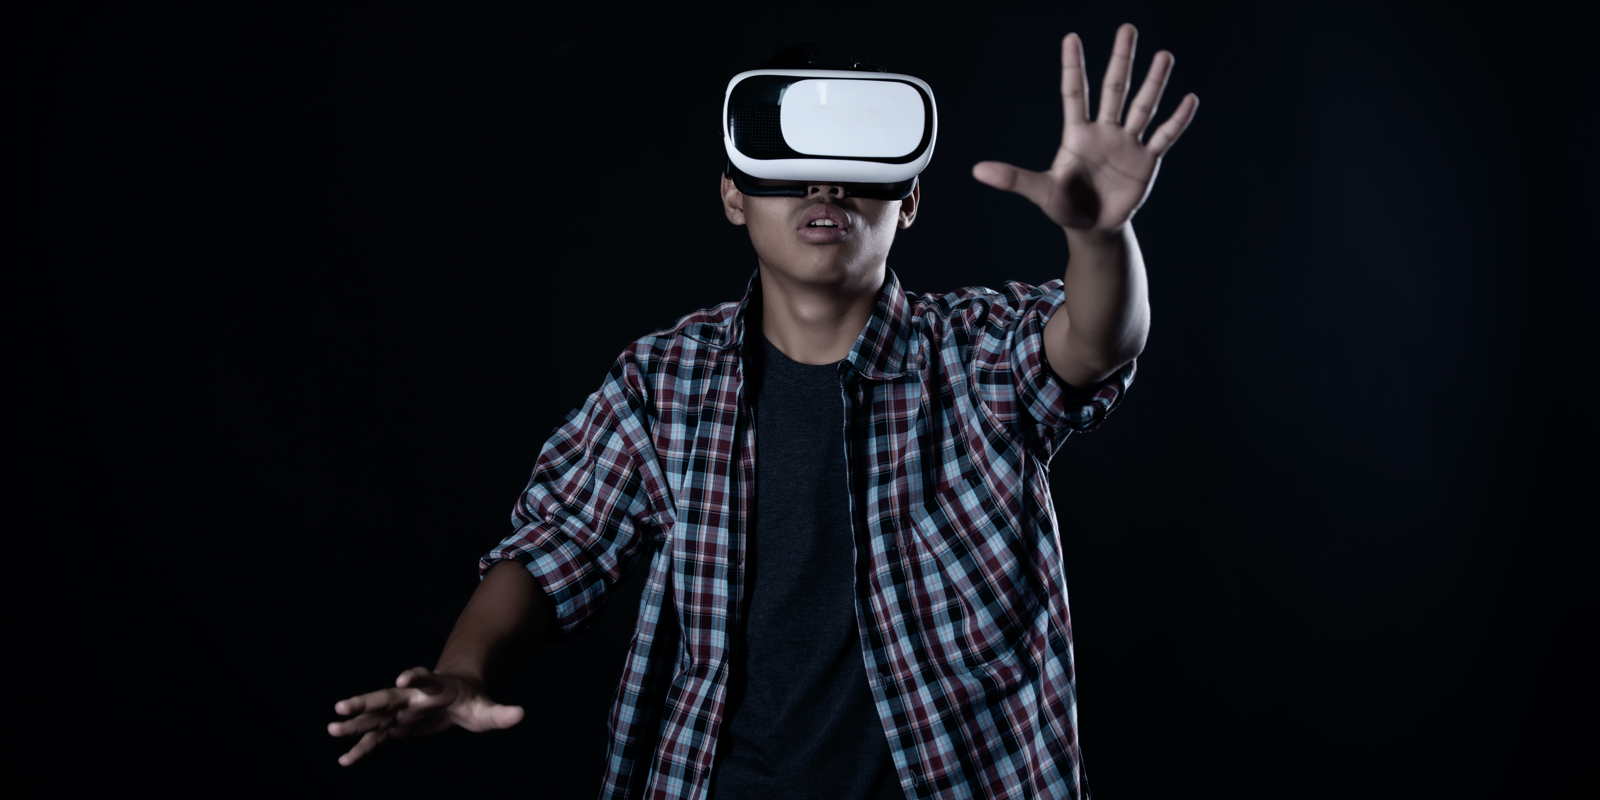 Trends in video - Virtual Reality